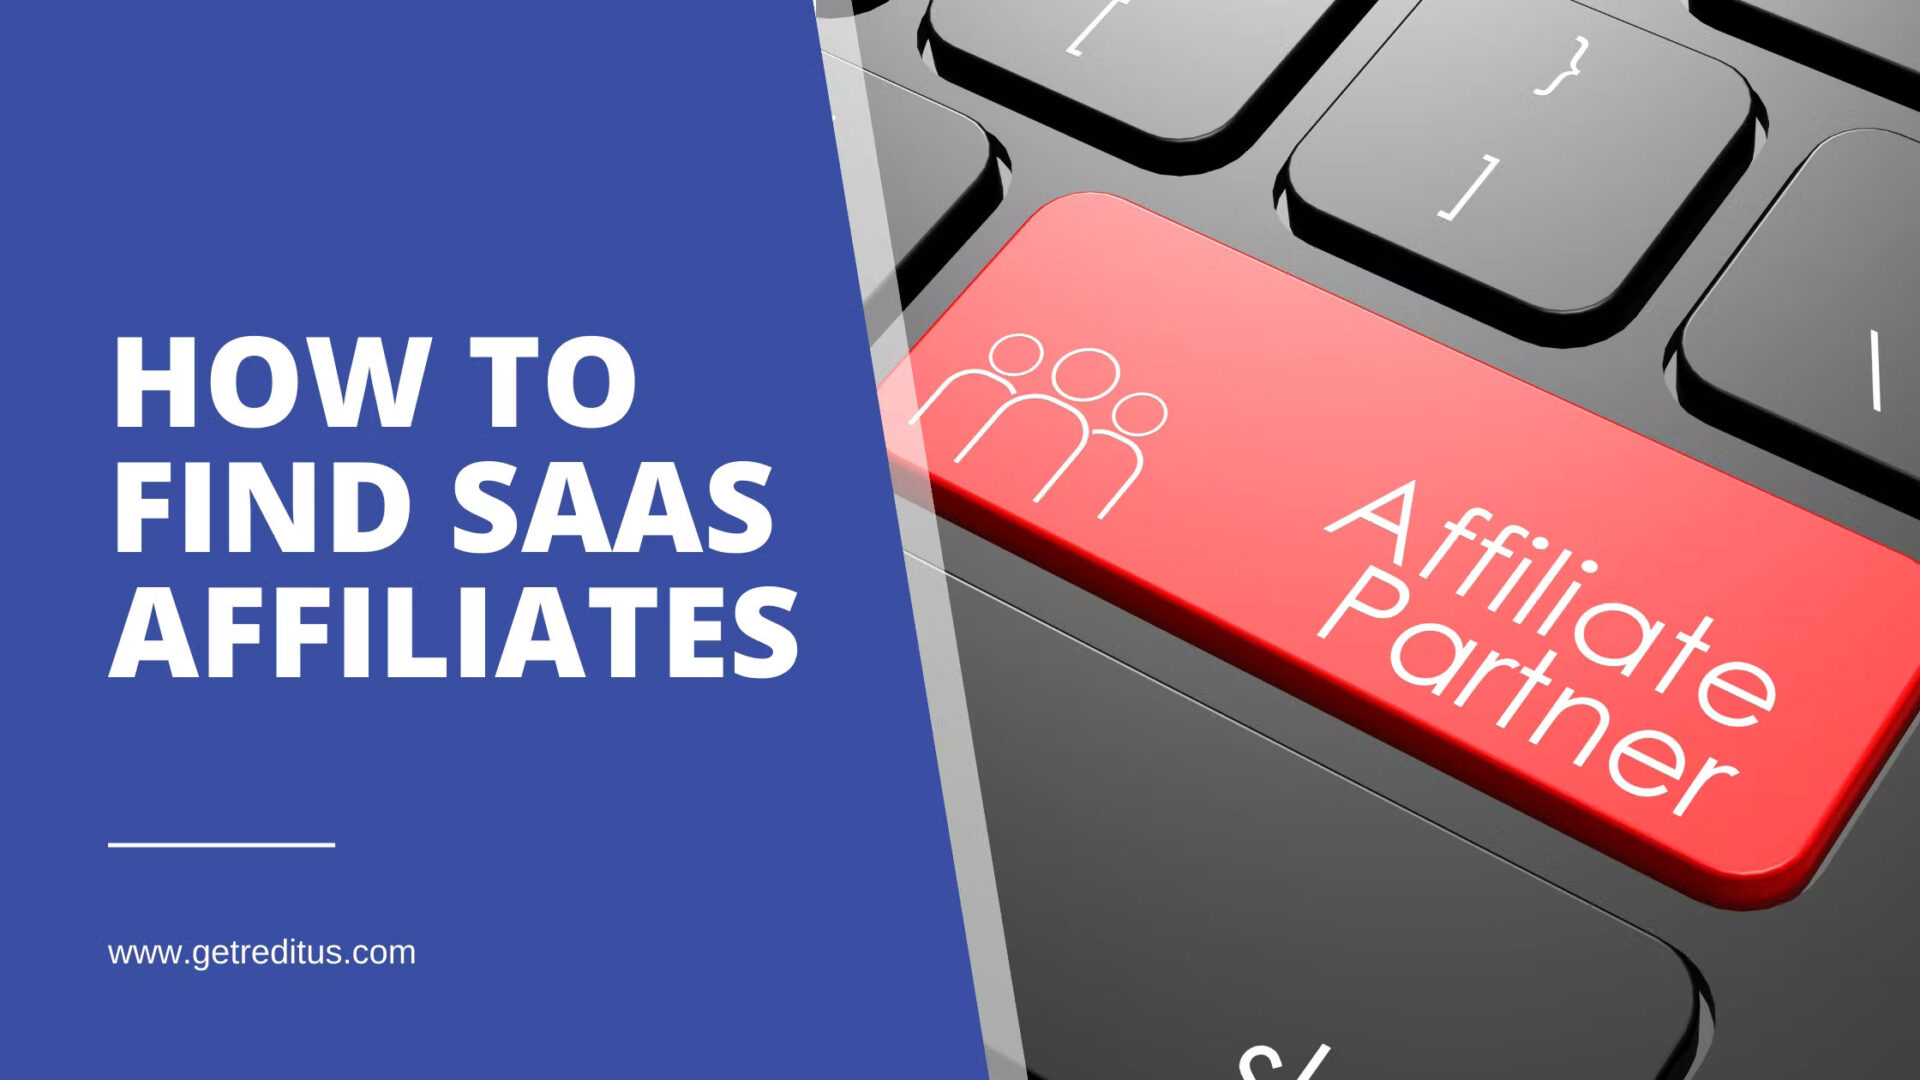 https://www.getreditus.com/blog/how-to-find-affiliates-for-your-saas/